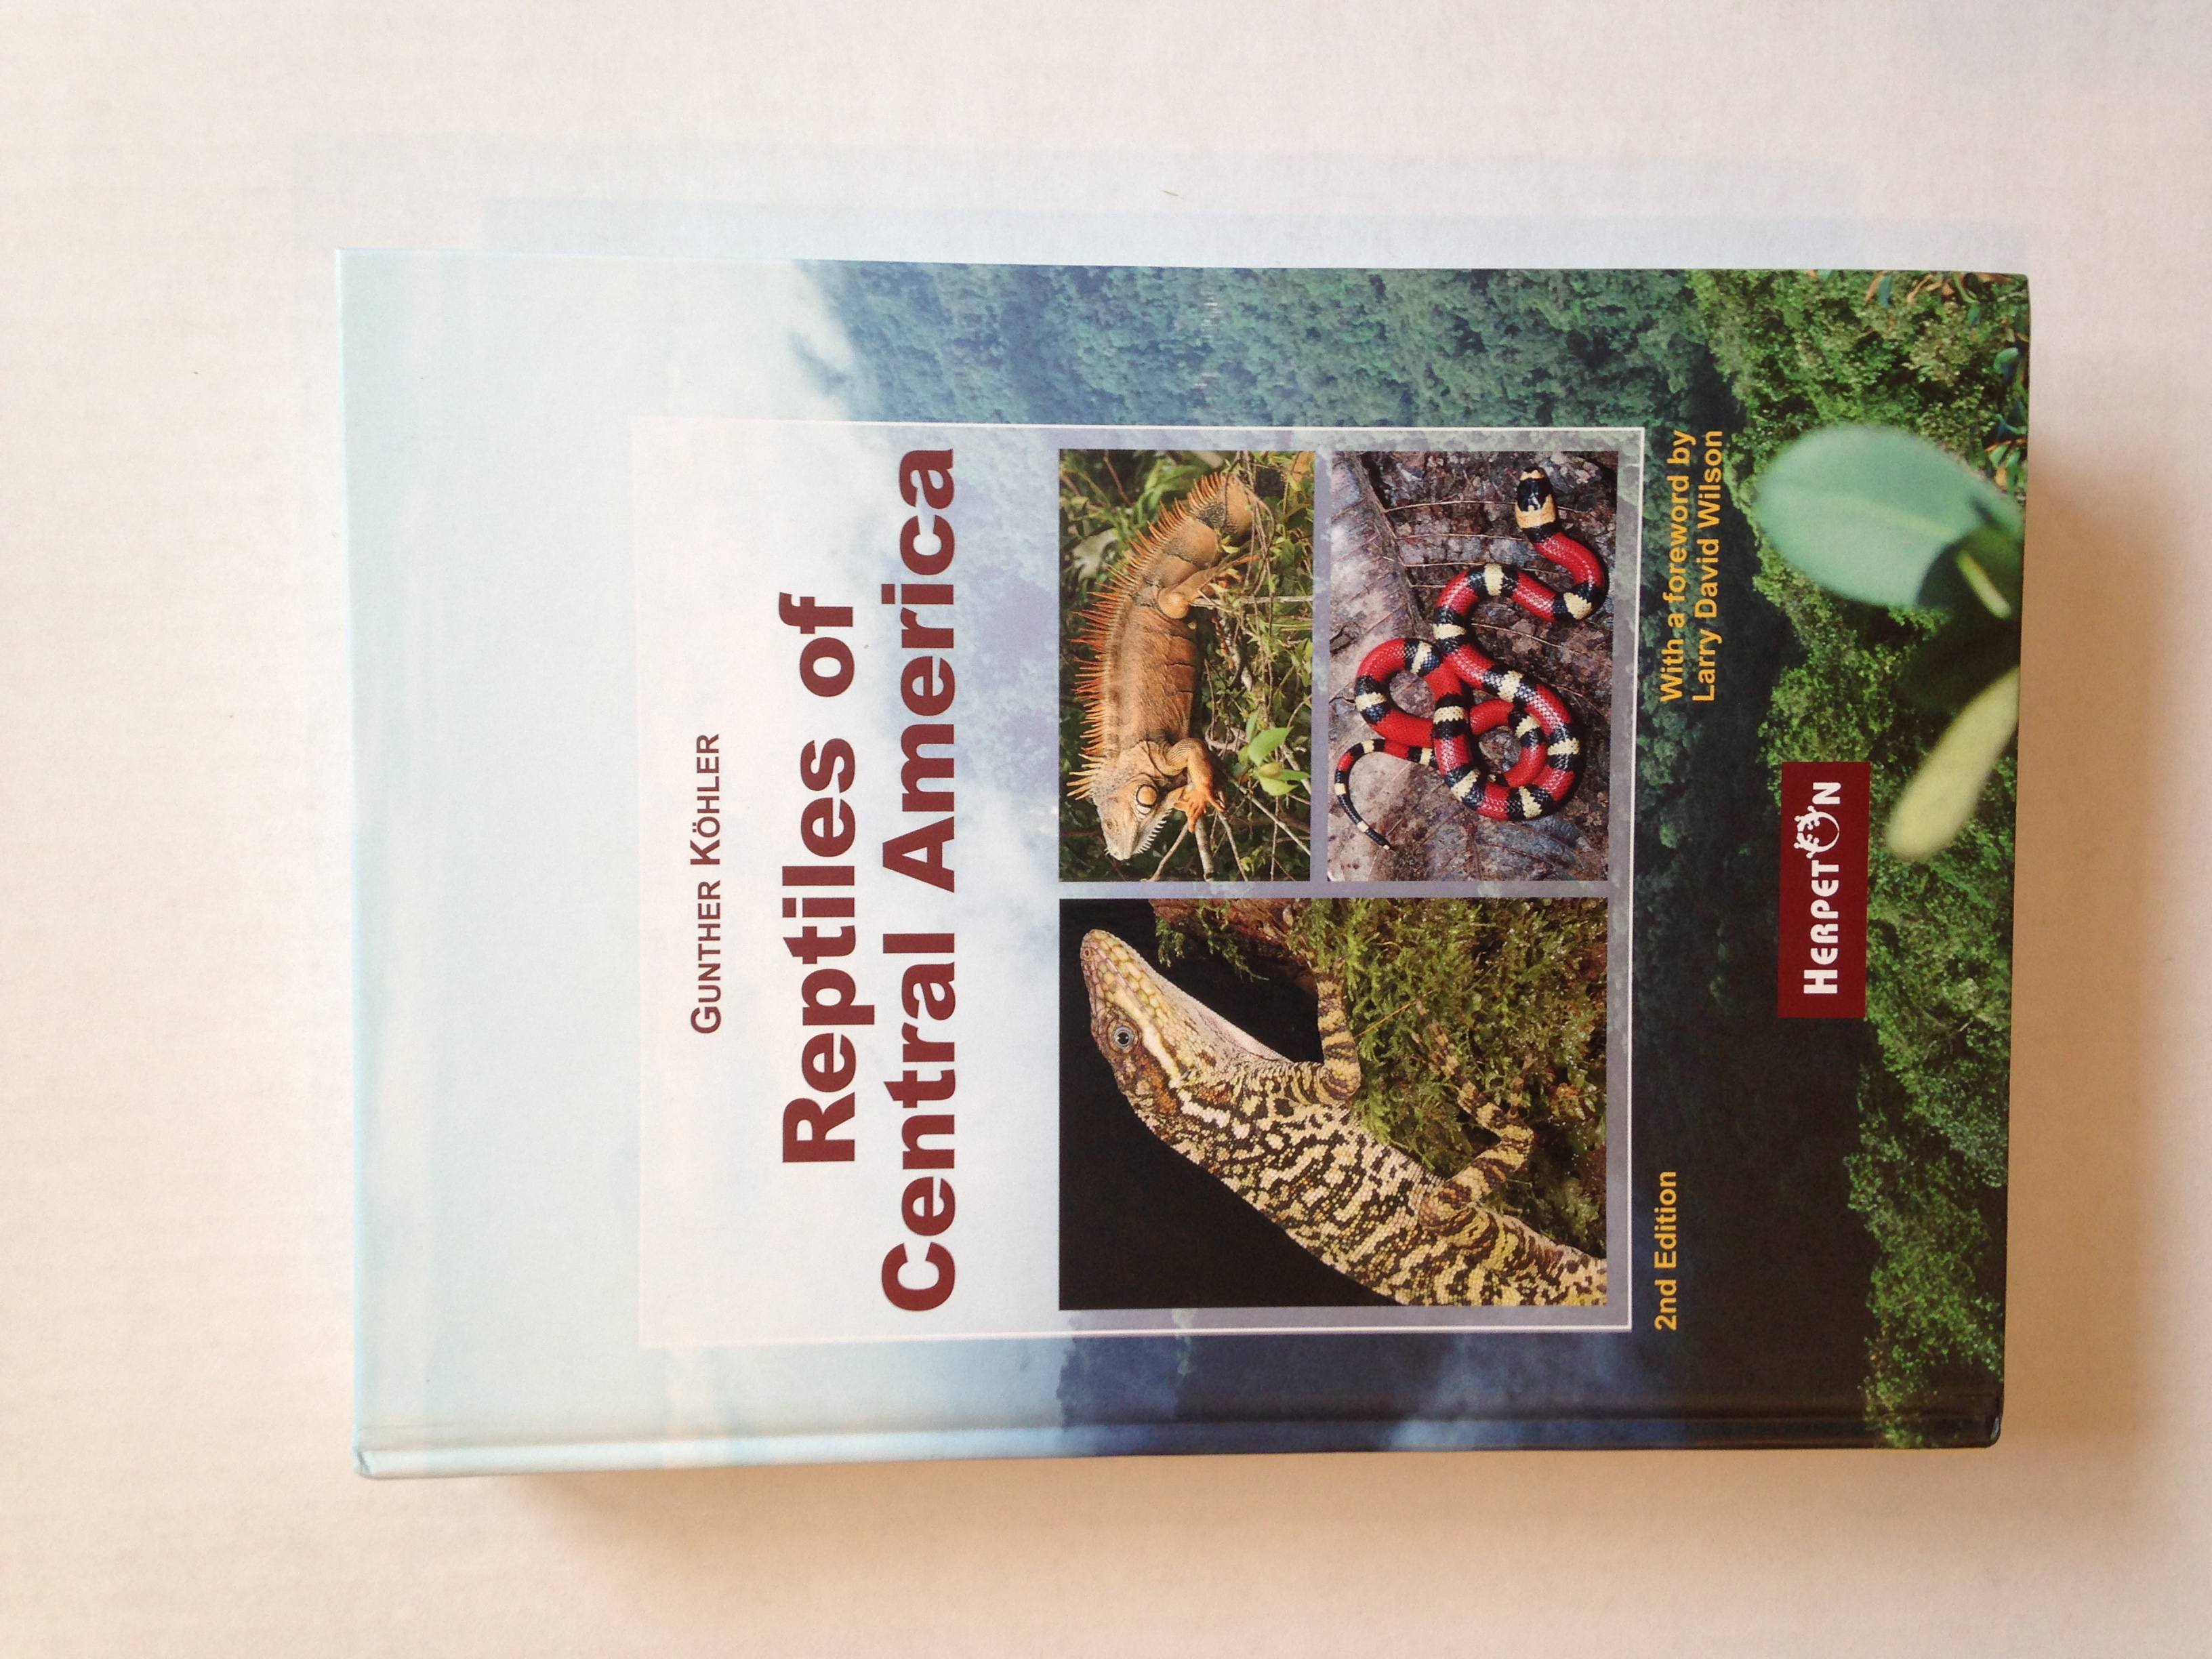 REPTILES OF CENTRAL AMERICA, 2nd Edition - Kohler, Gunther